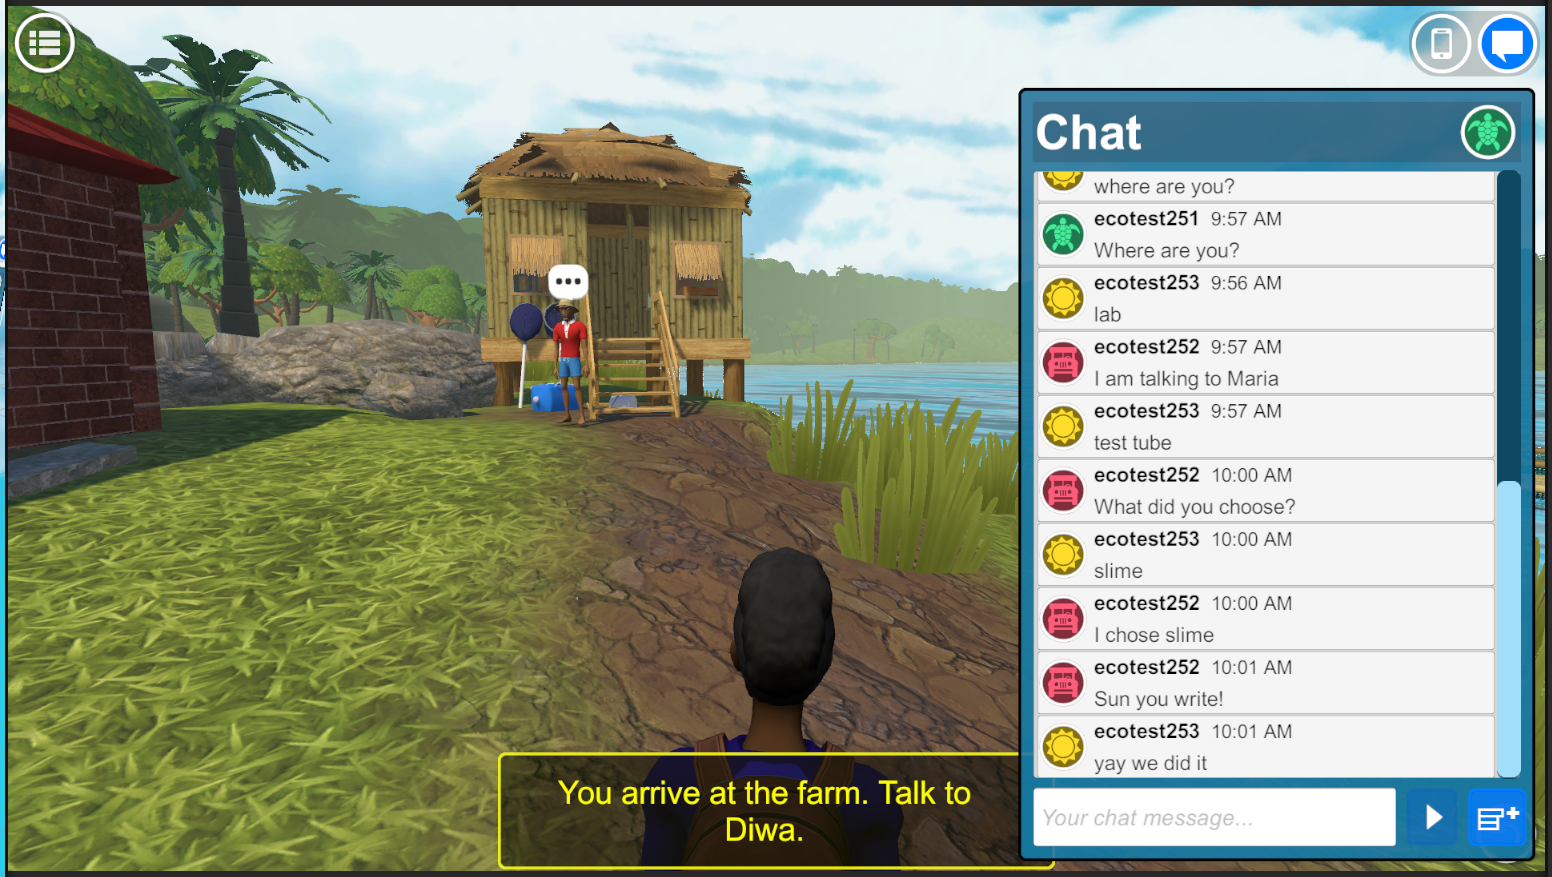 Image of EcoJourneys in game chat interface.